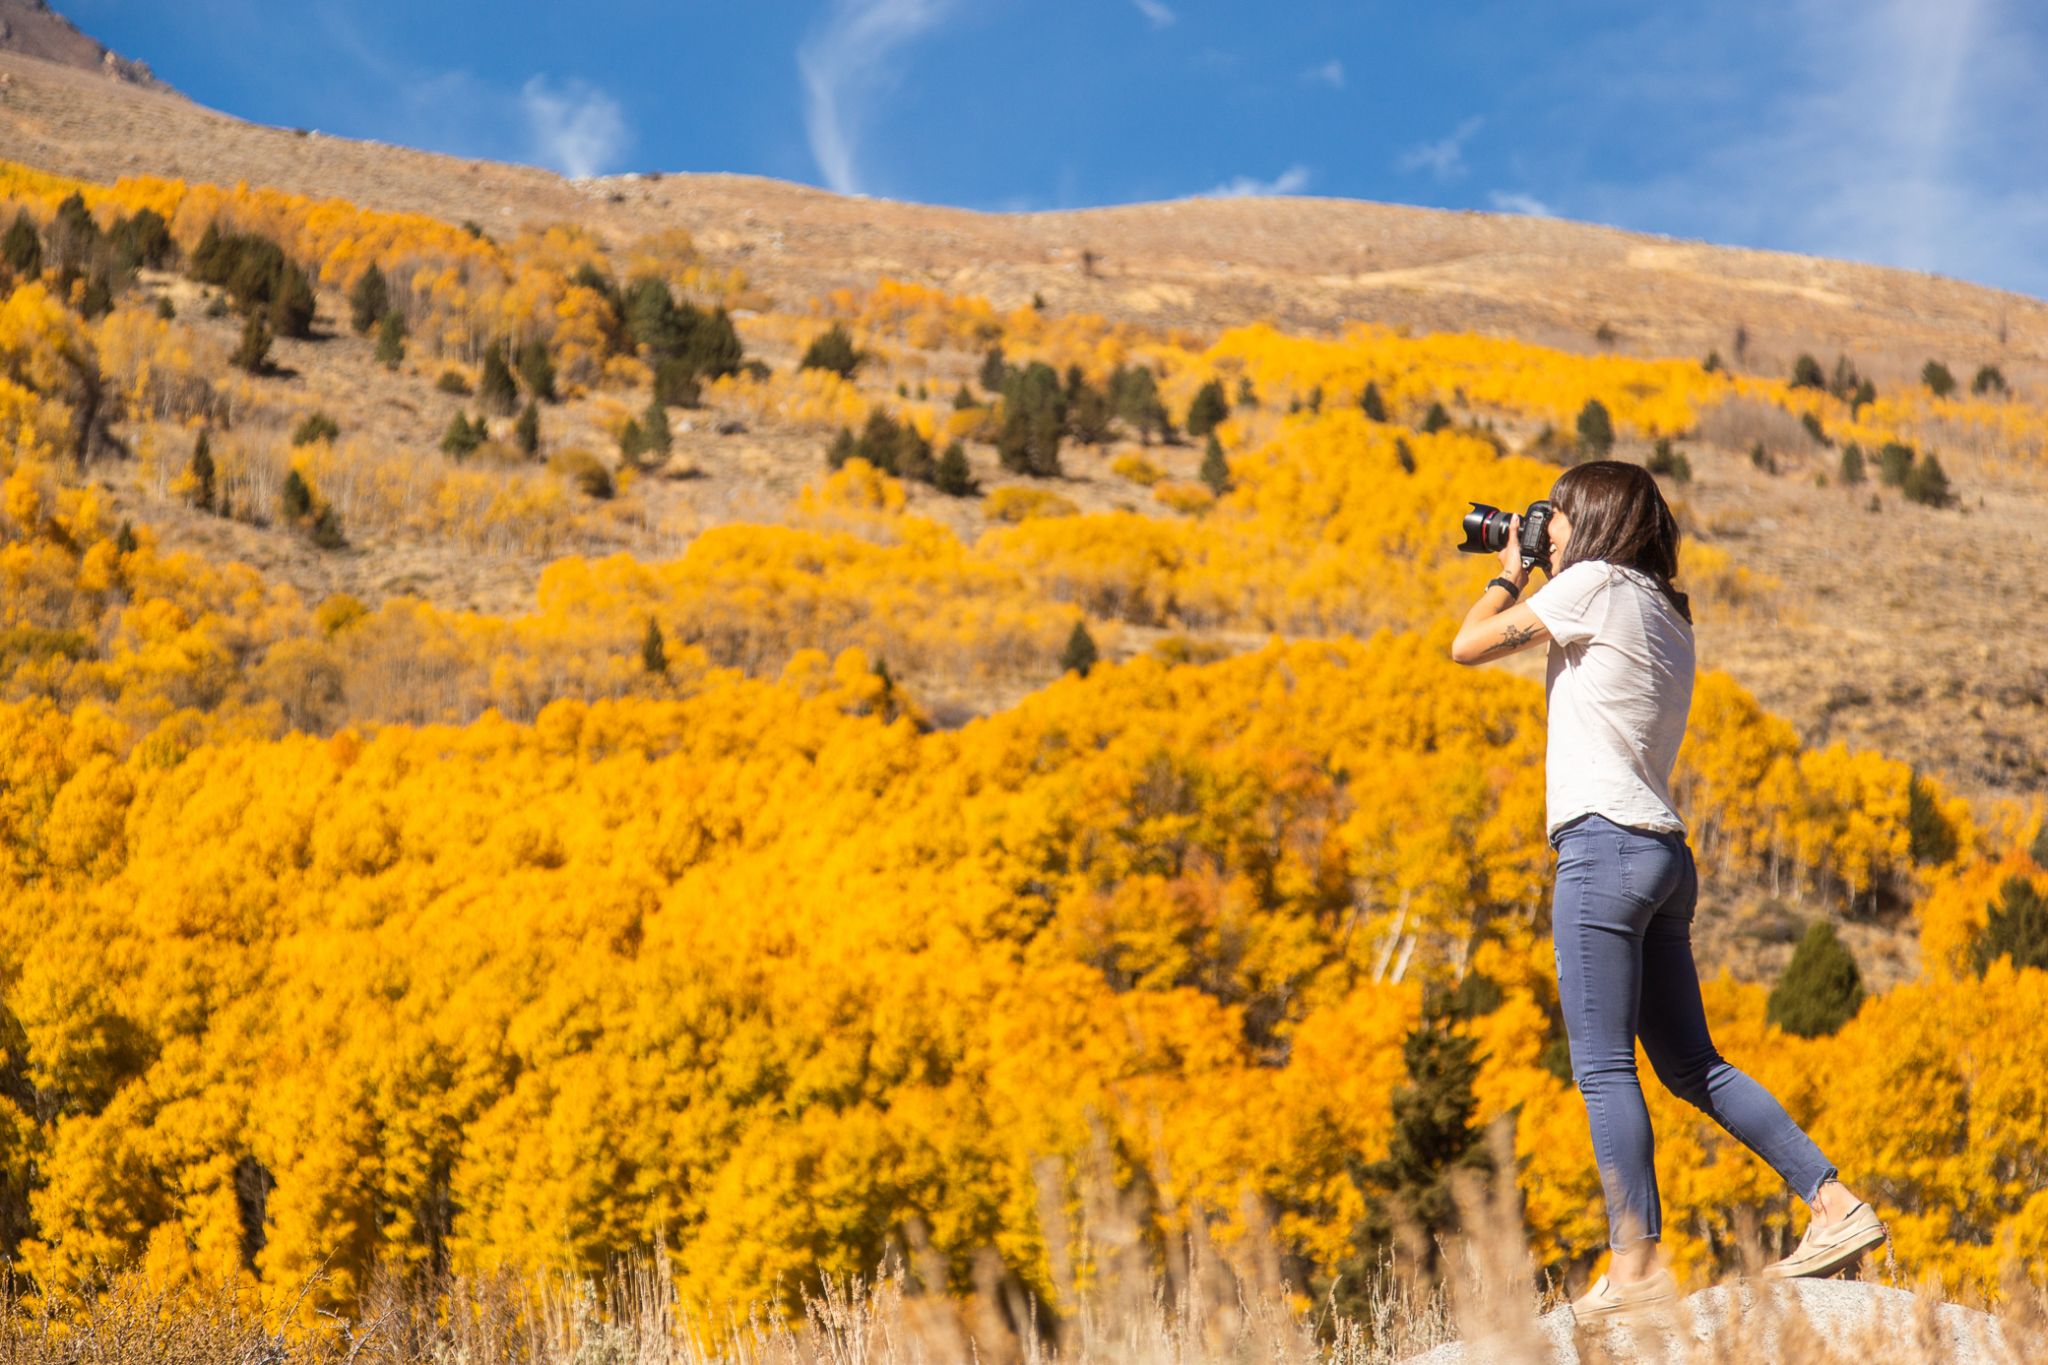 This year's California fall foliage season is one for the record books